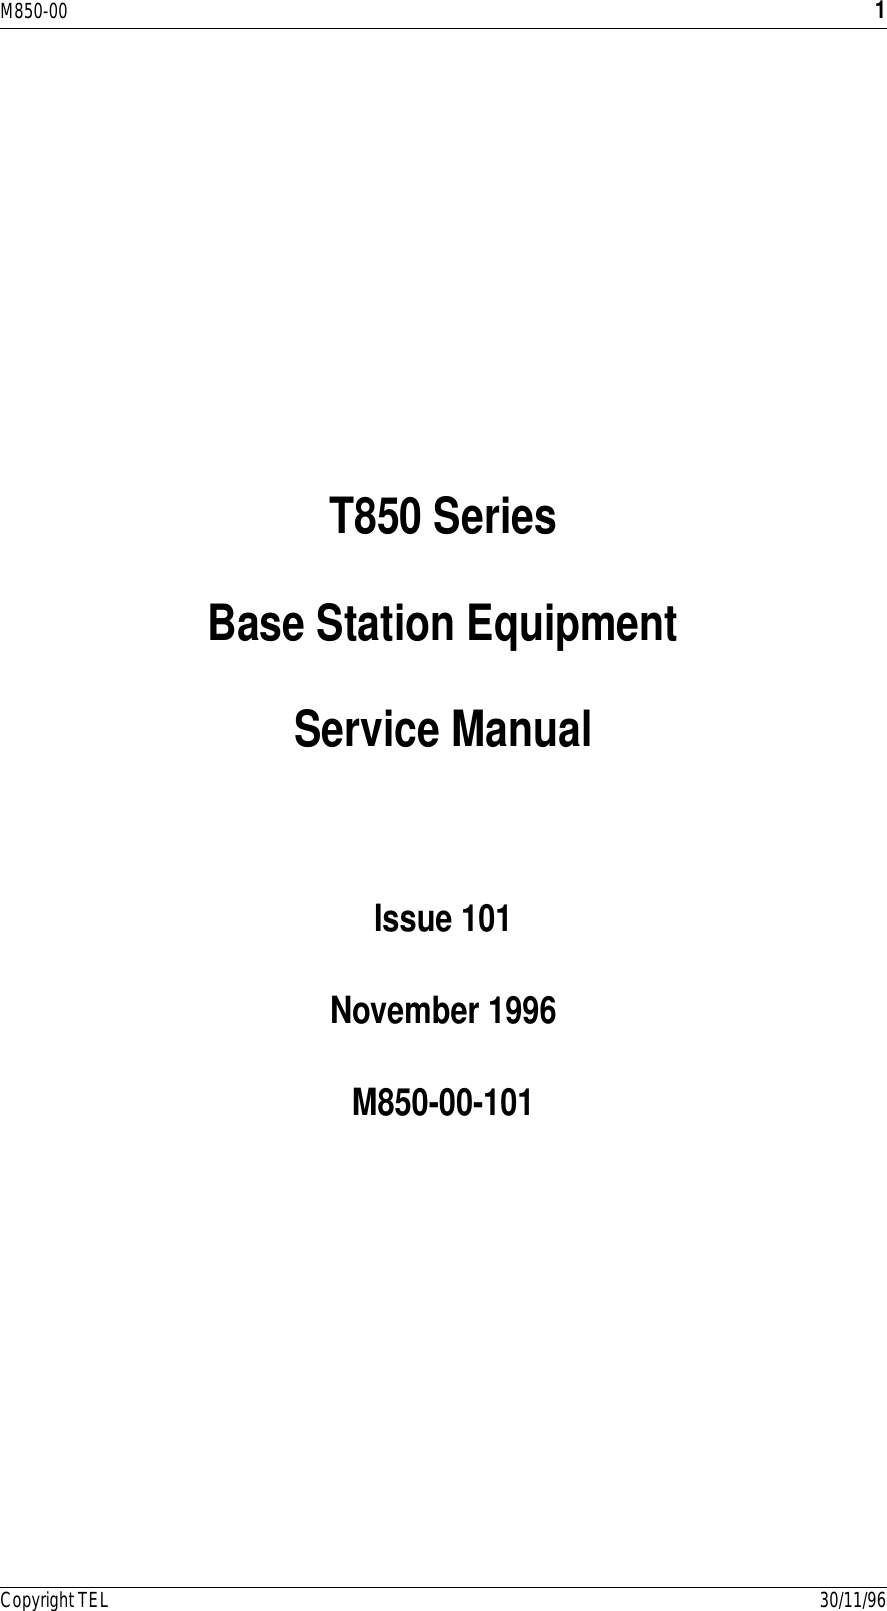 Page 1 of 12 - M850-00-101 T800/T800 SERIES 1 MANUALS/M850-00-101/Pages 1-12 Pages